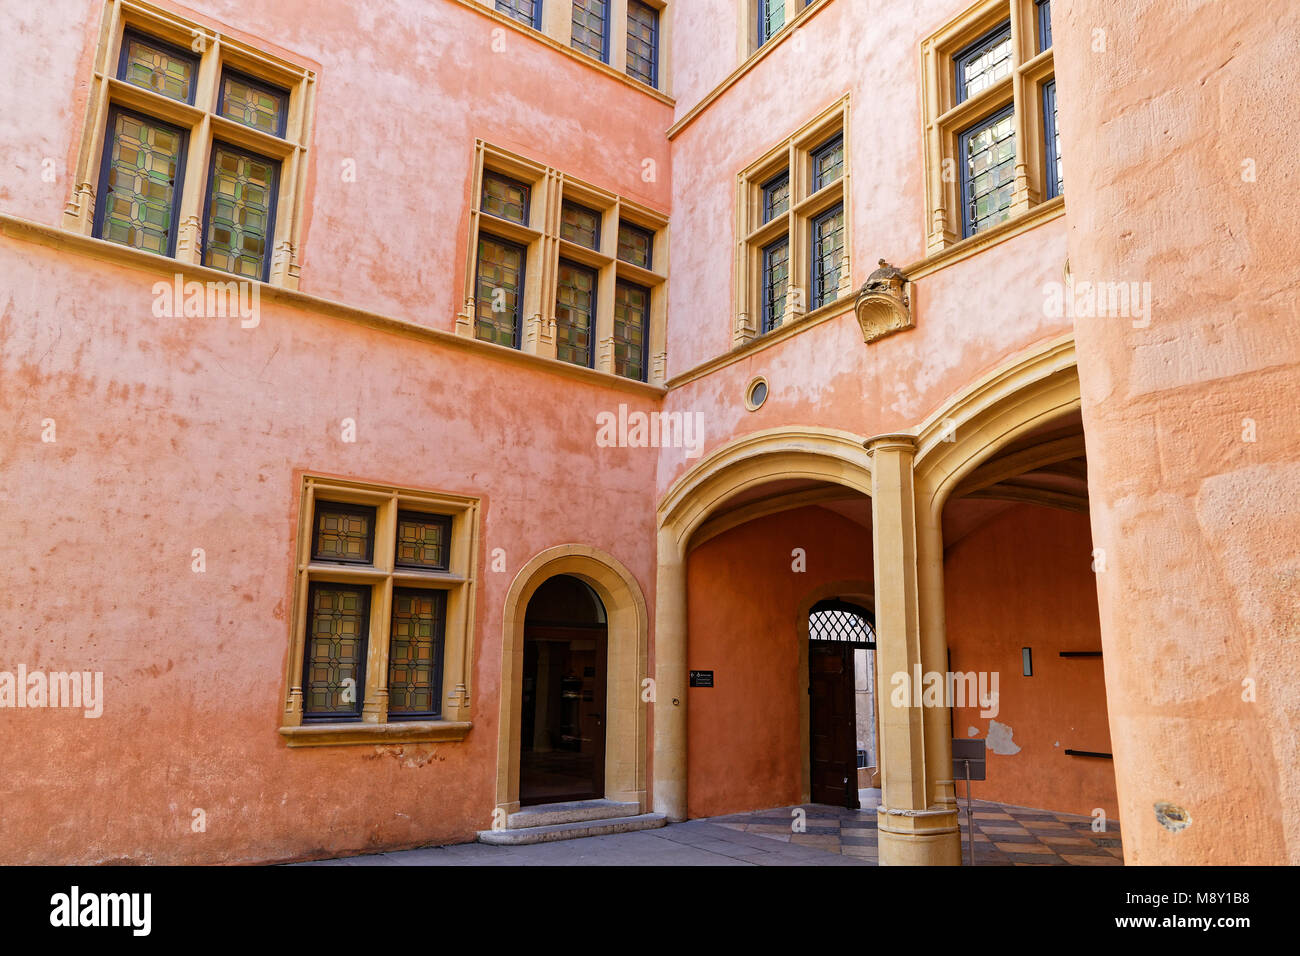 LYON, FRANCE, March 11, 2018 : Renaissance Architecture of the outsides of Gadagne Museum. Stock Photo